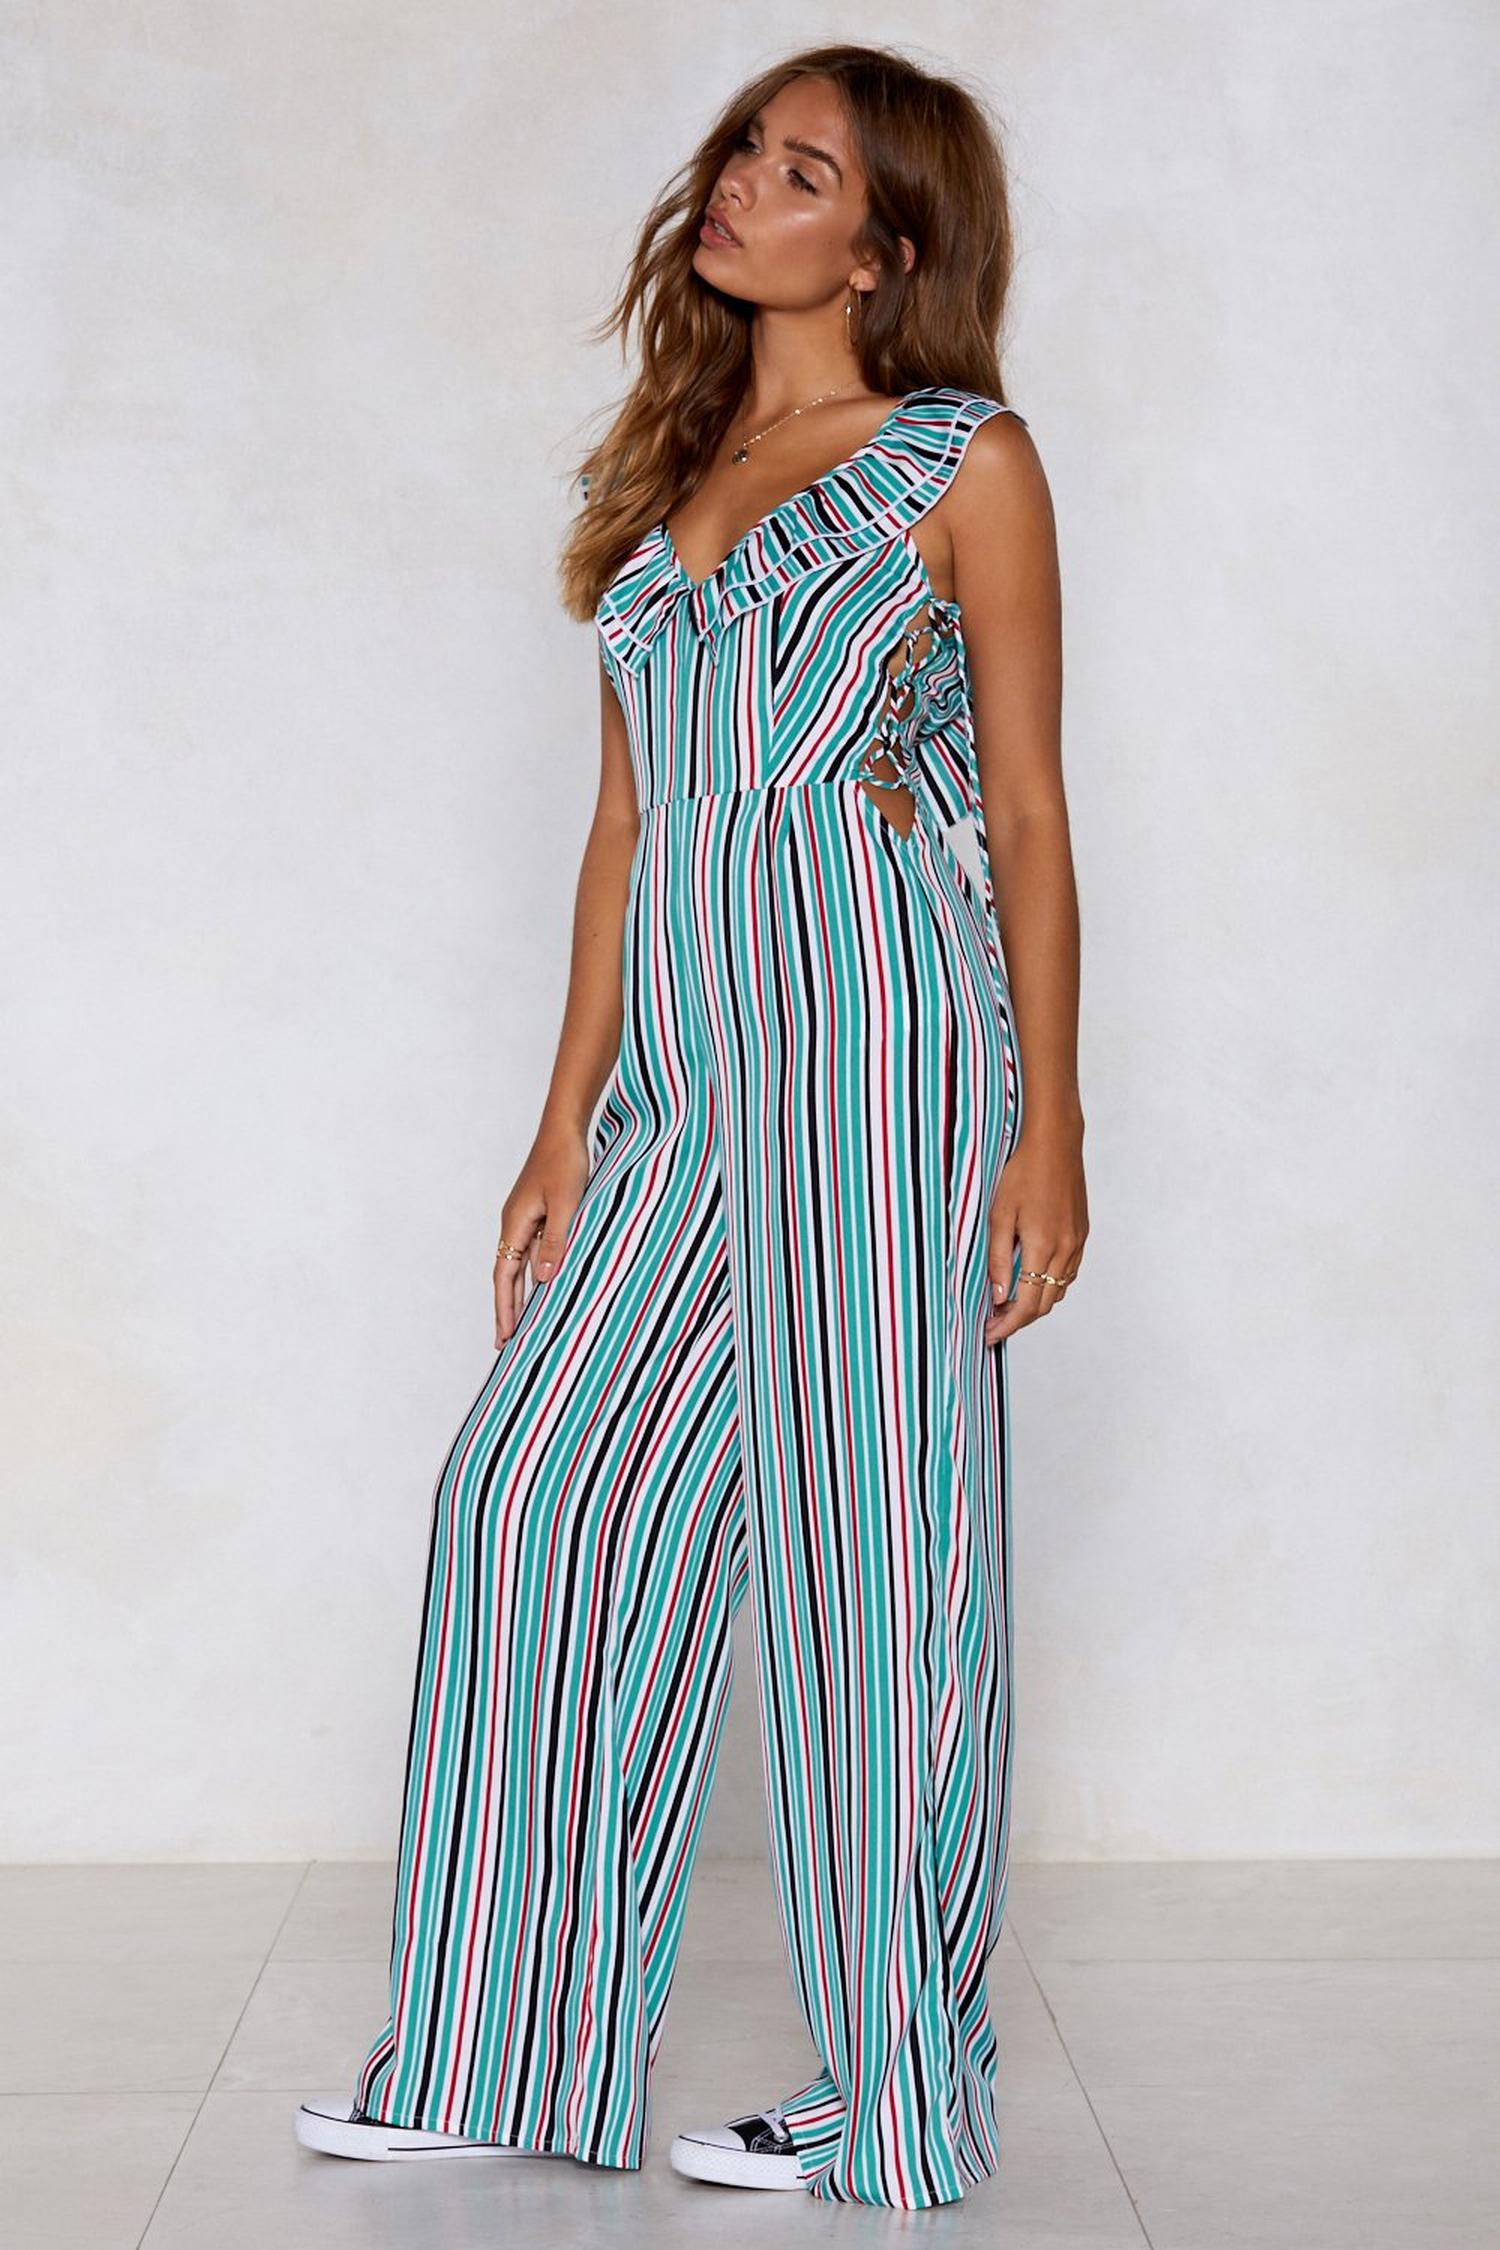 A Poet and You Didn't Know It Striped Jumpsuit | Nasty Gal